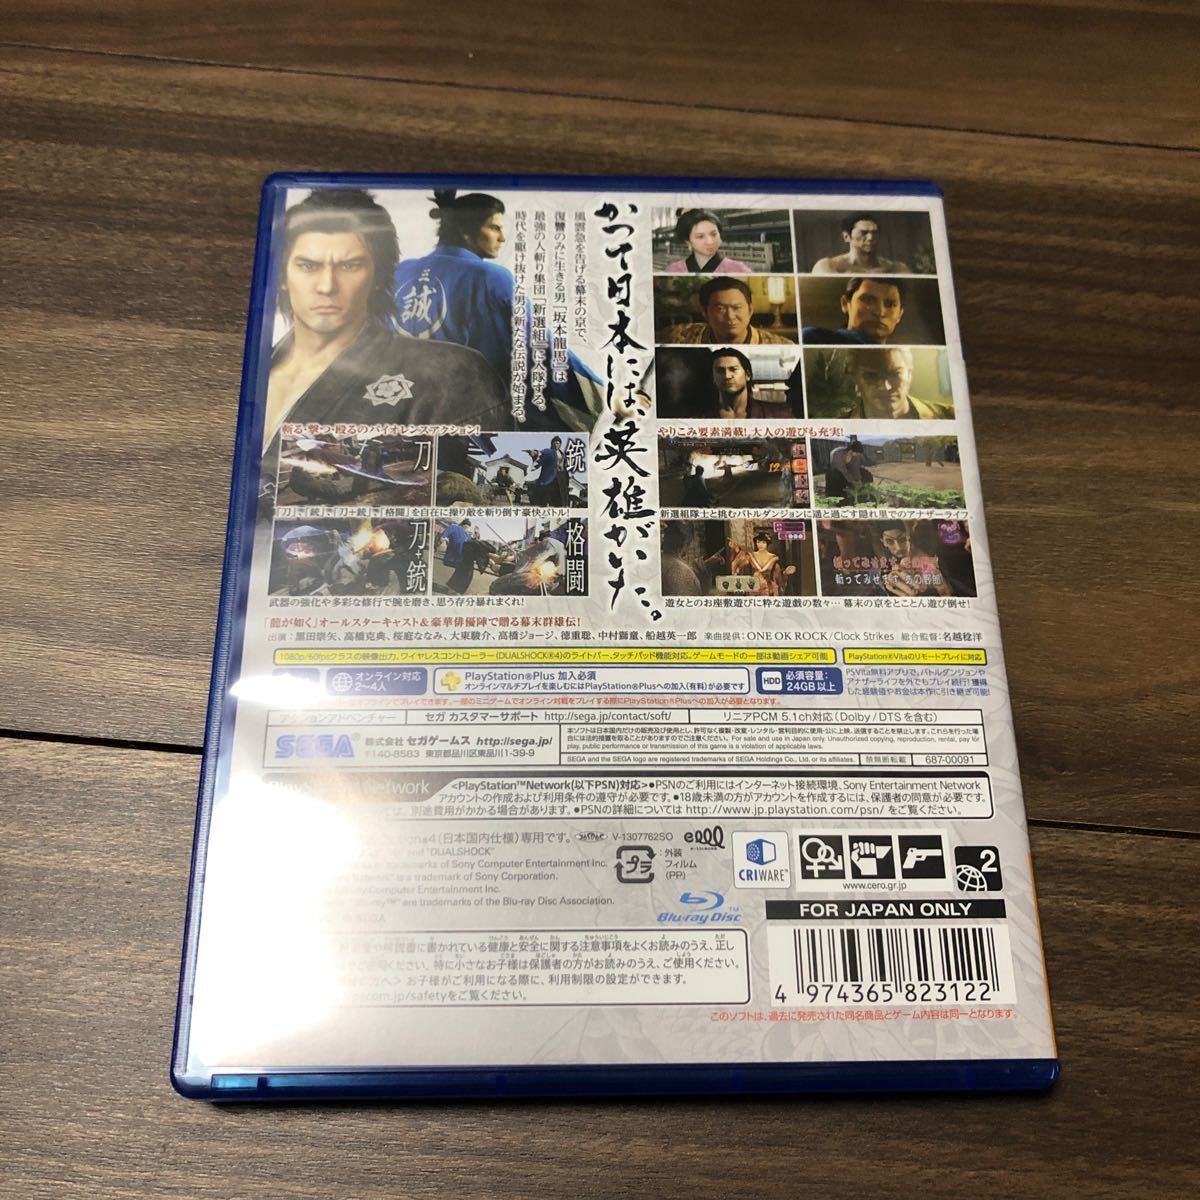 【PS4】 龍が如く 維新！ 中古